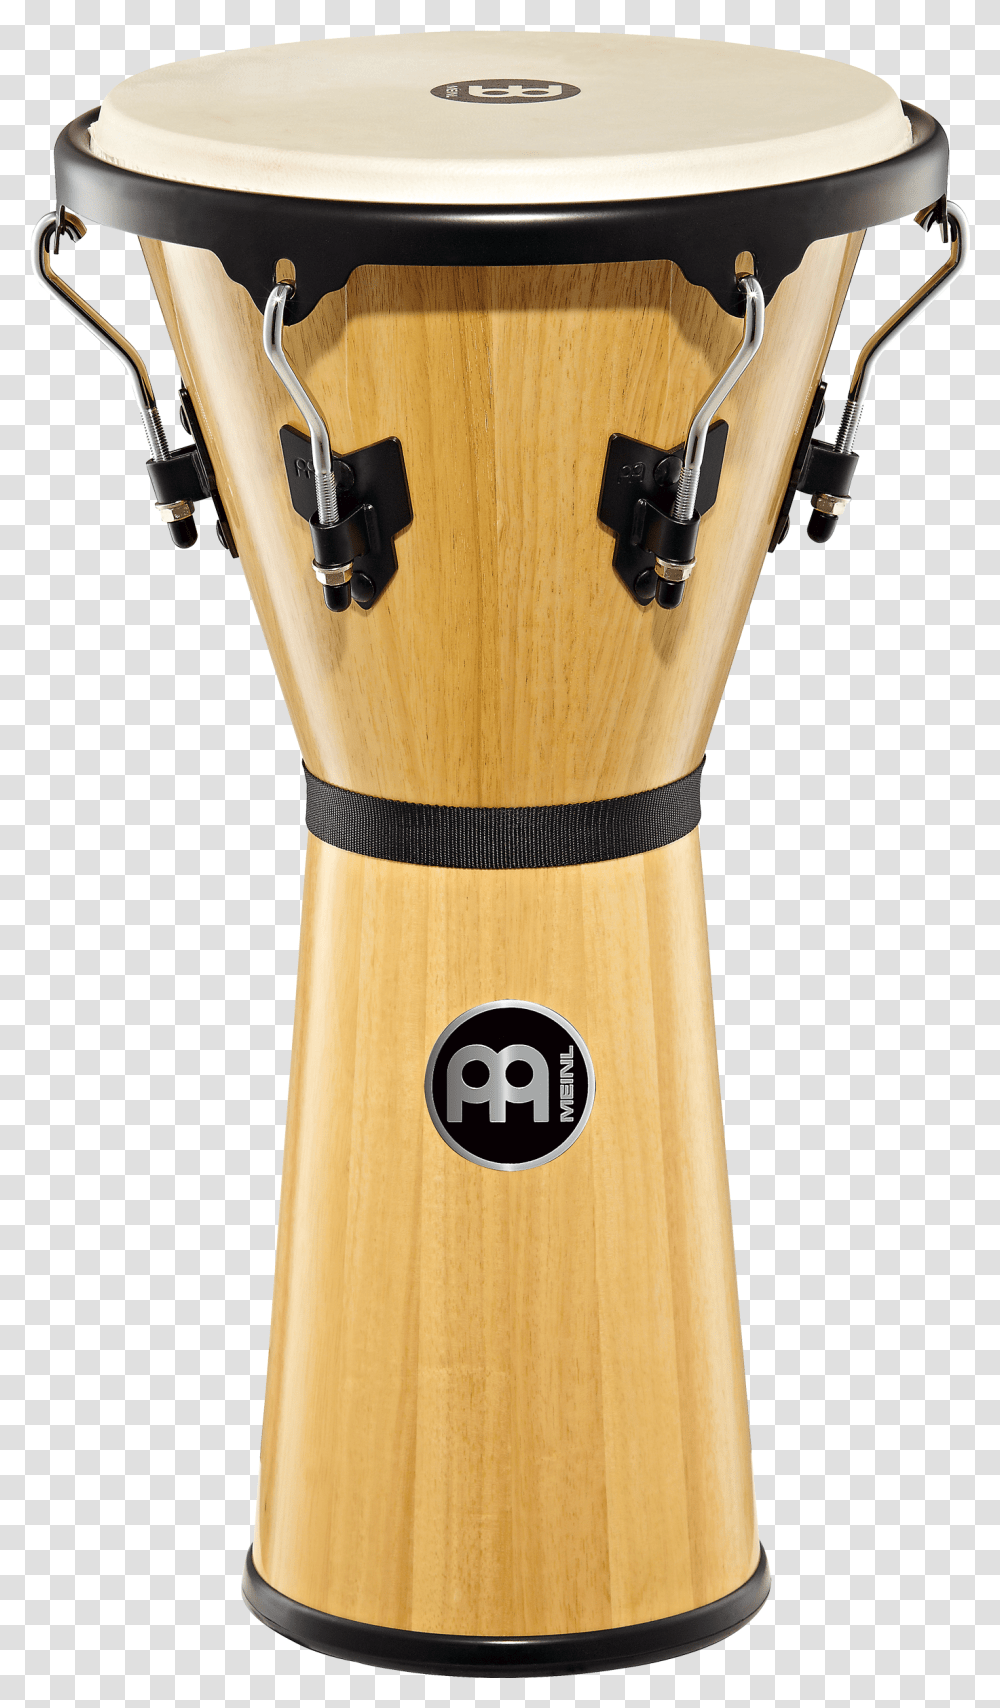 Meinl Headliner Djembe, Drum, Percussion, Musical Instrument, Conga Transparent Png